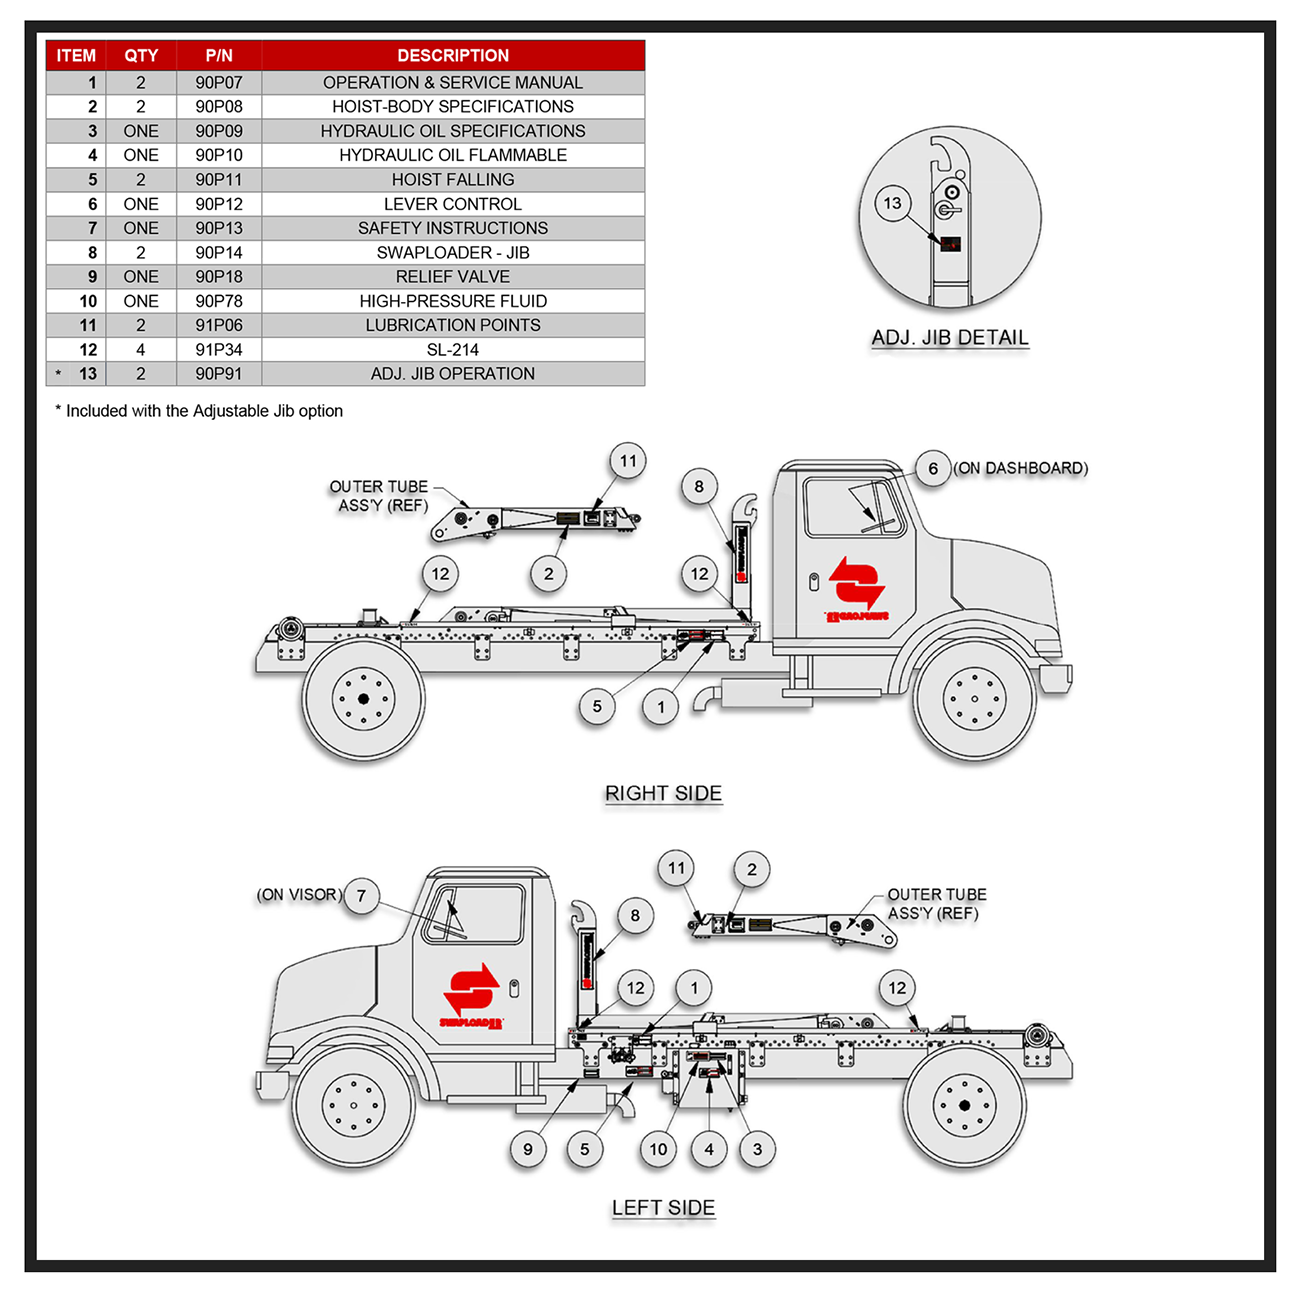 Swaploader SL-214 Decal Assembly Diagram